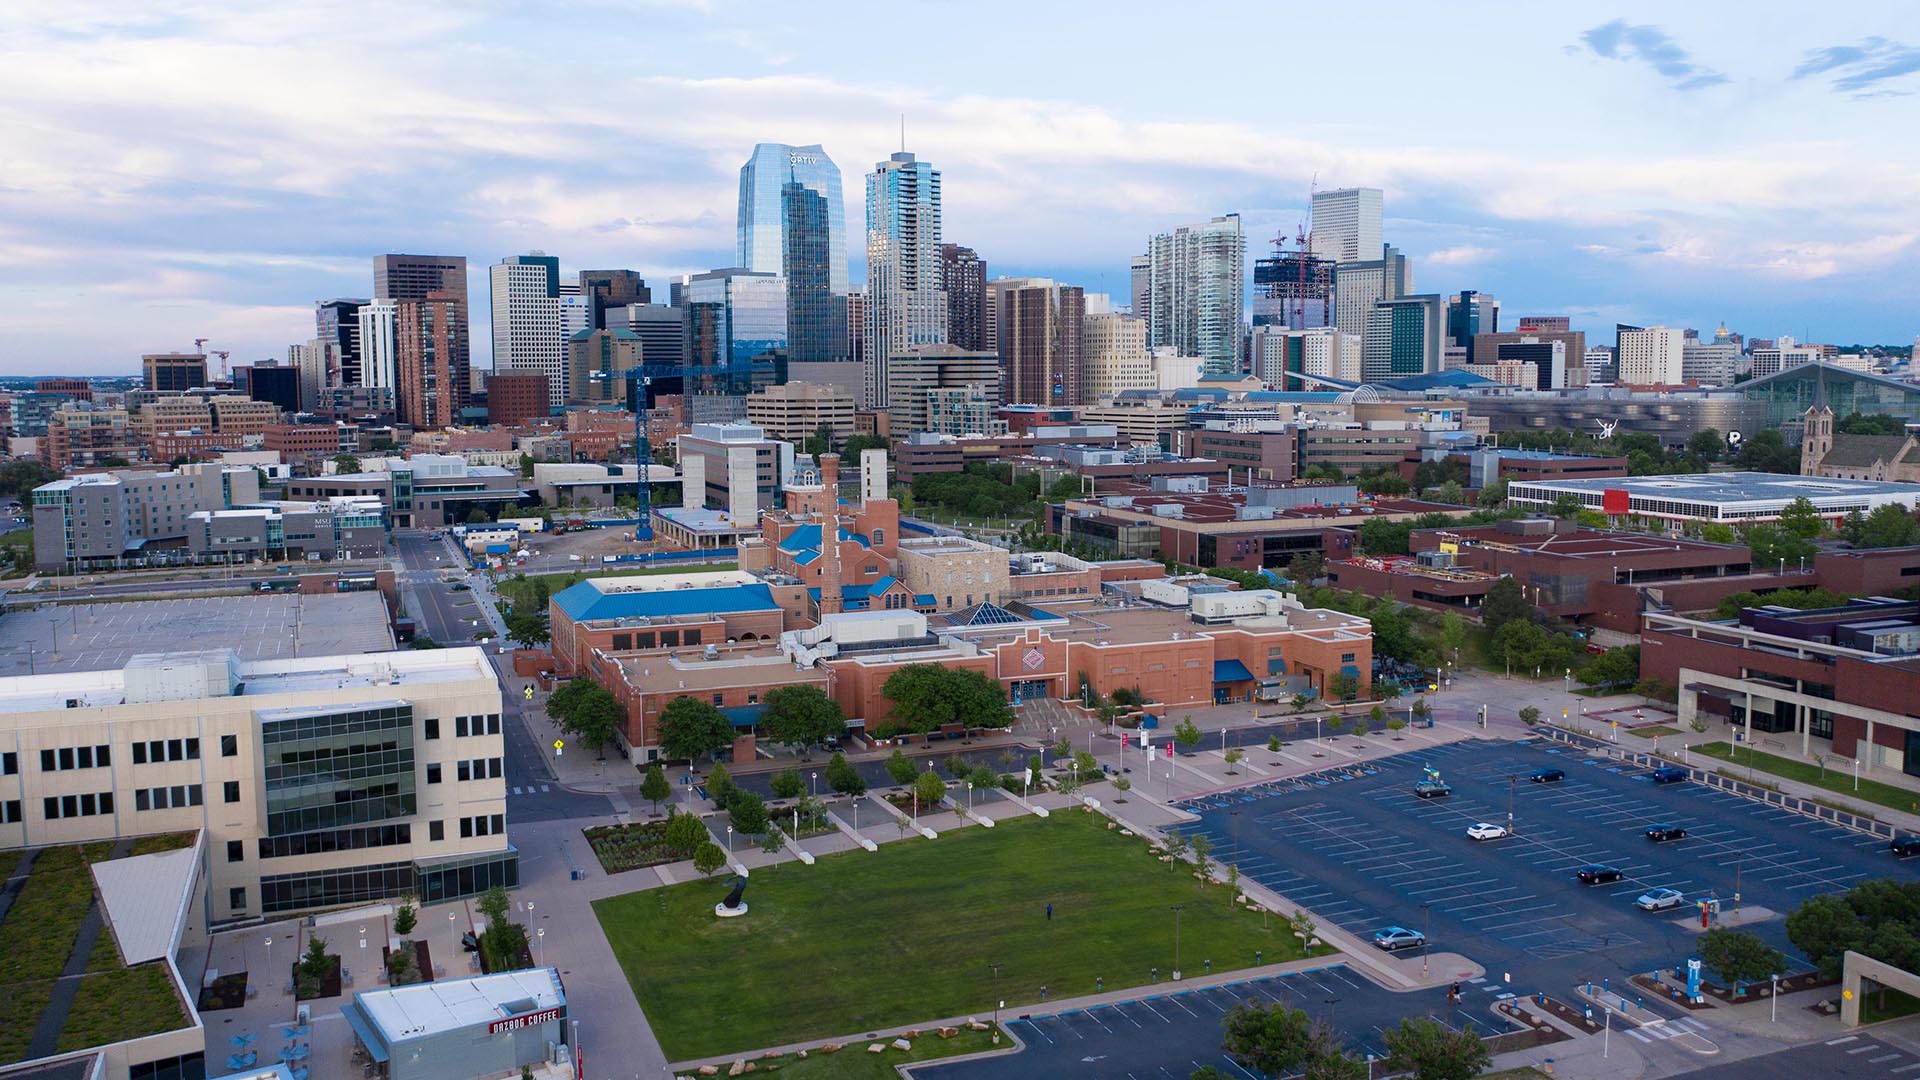 An aerial view of the Auraria Campus and downtown Denver